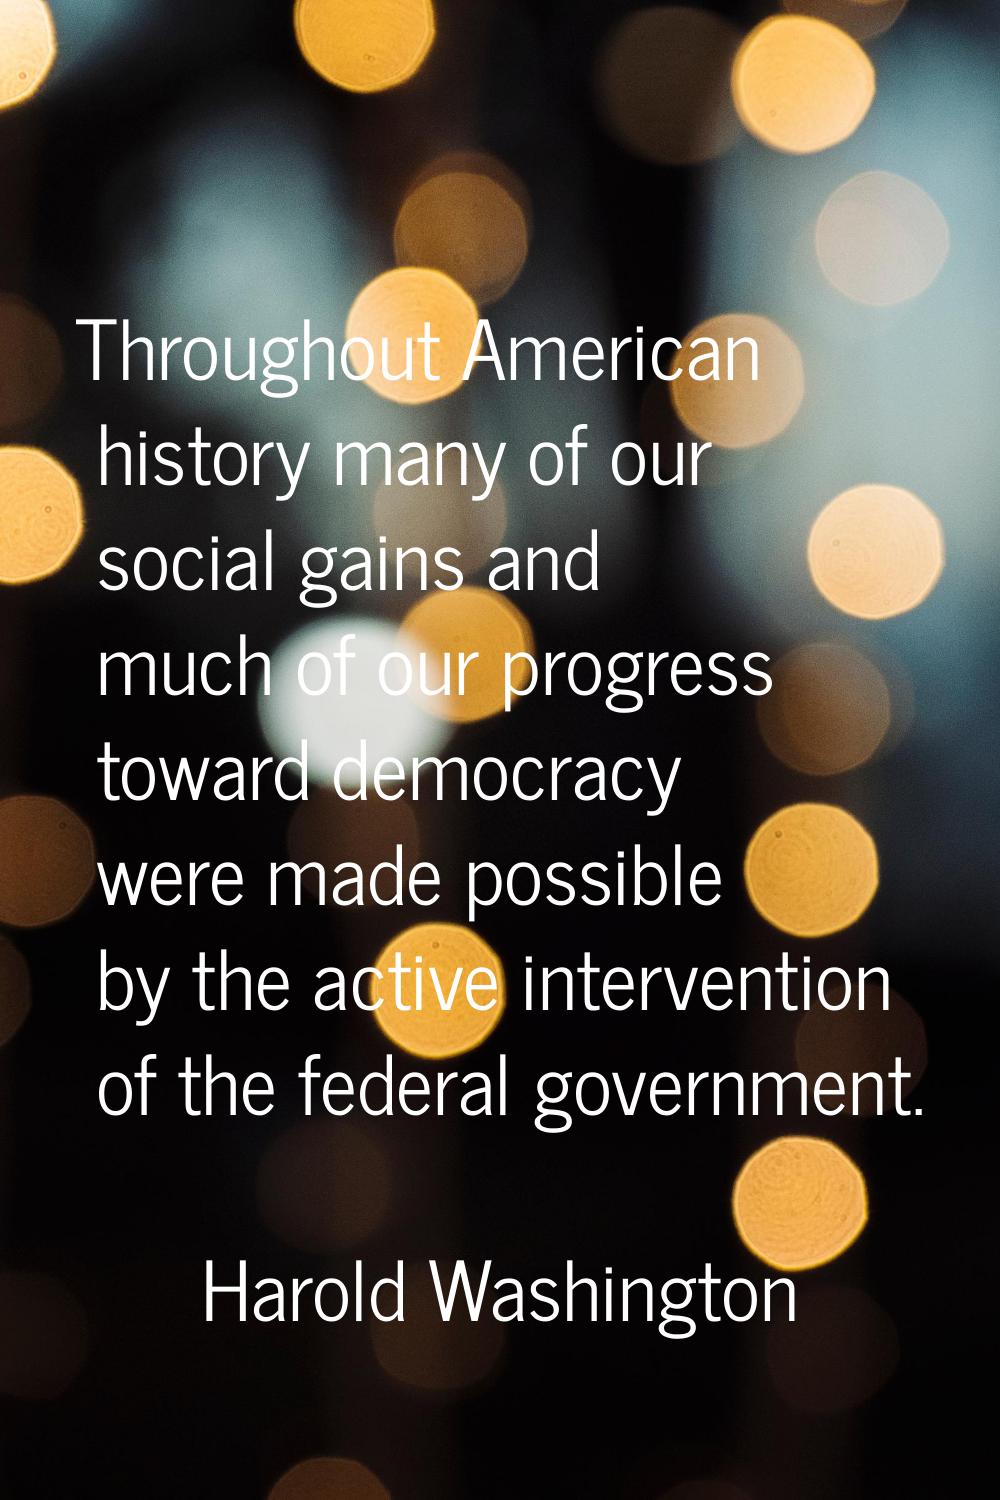 Throughout American history many of our social gains and much of our progress toward democracy were